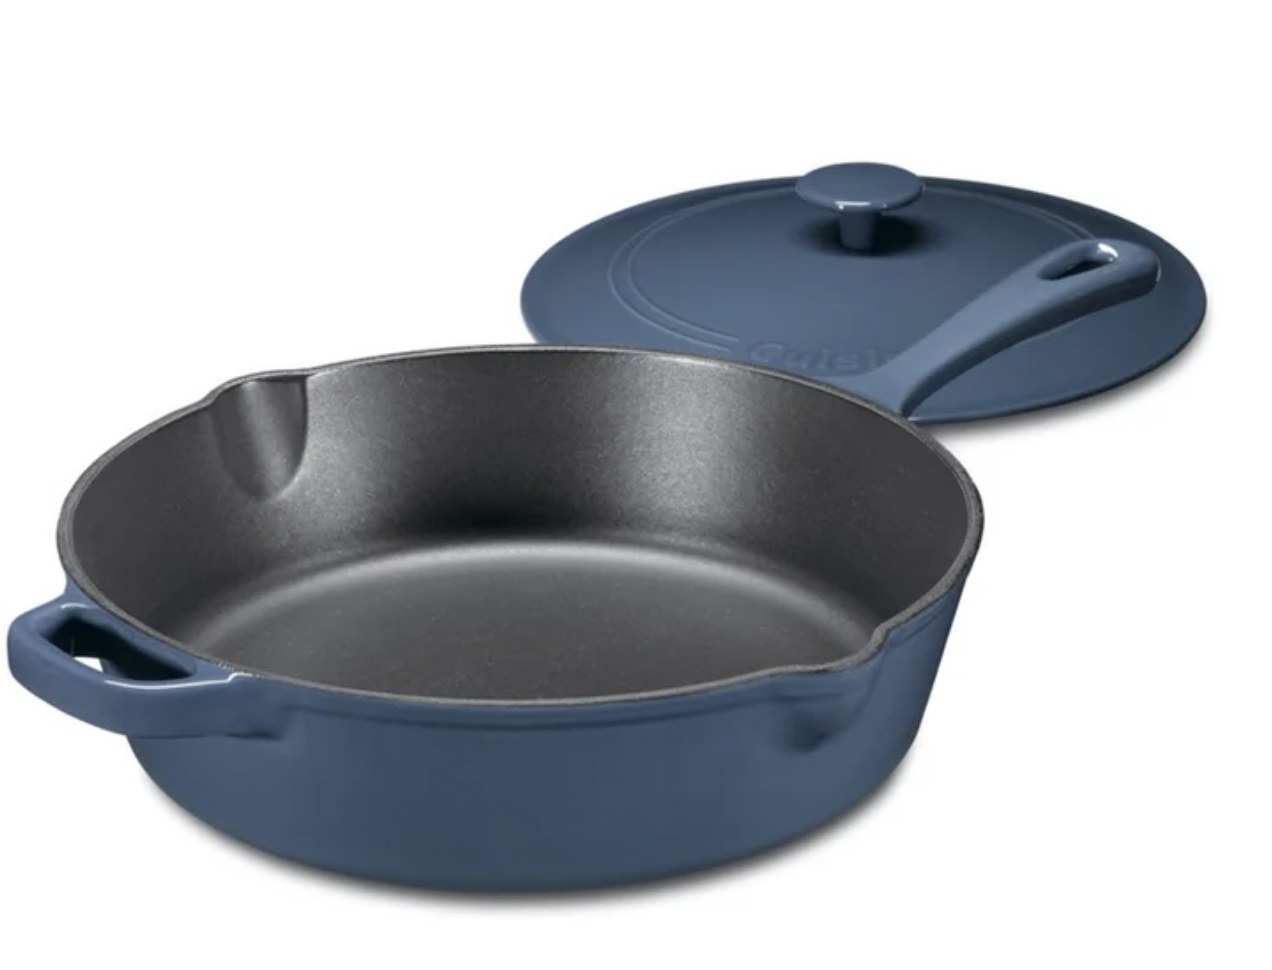 the blue fry pan with lid